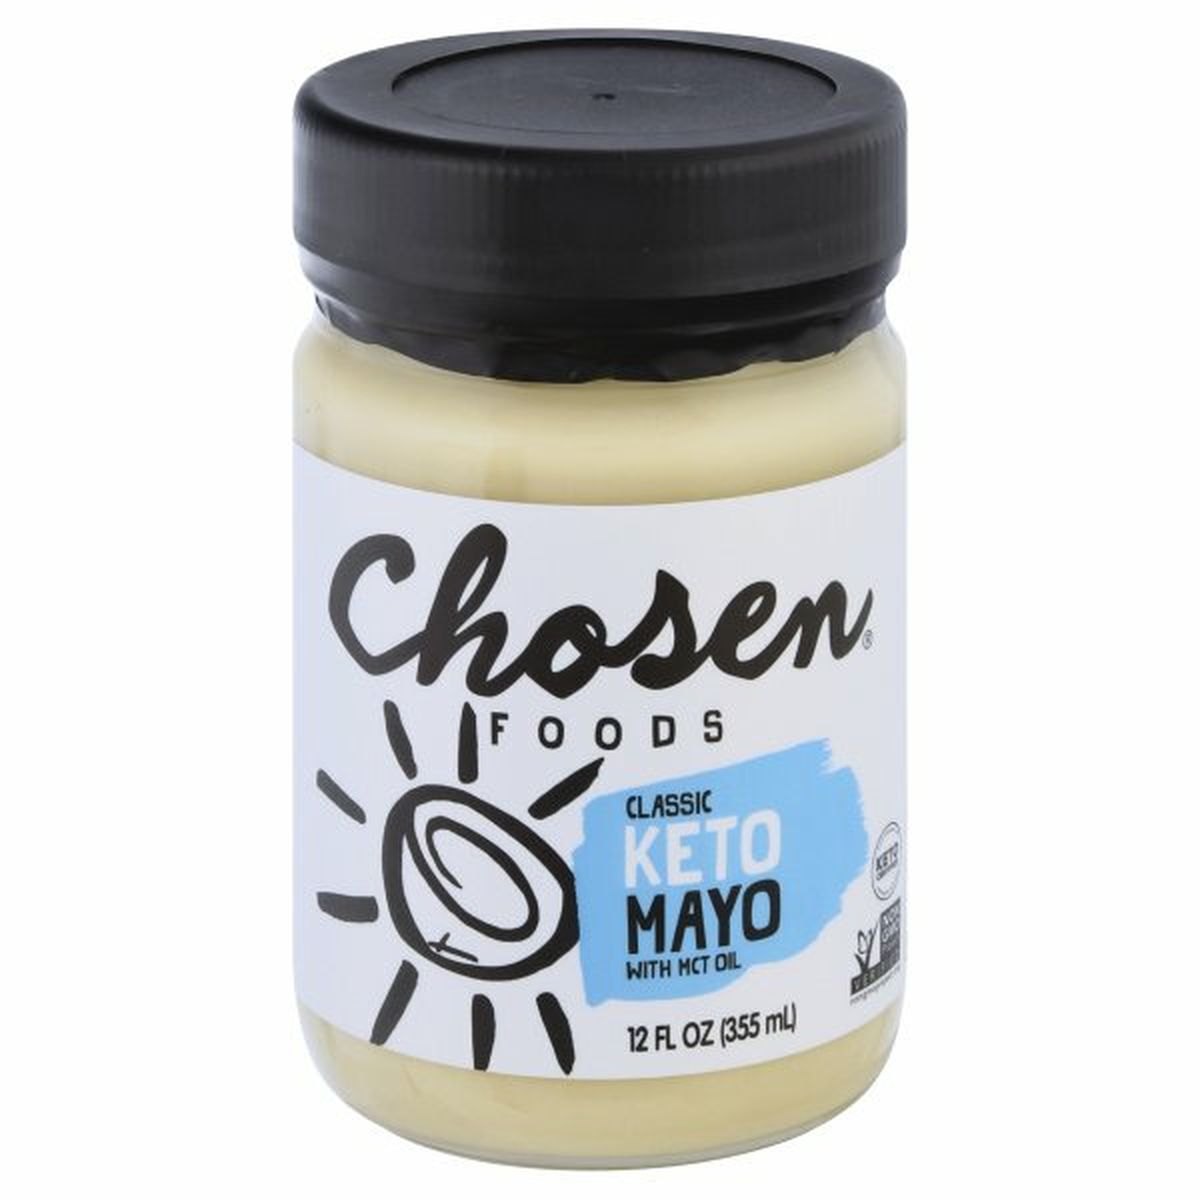 Calories in Chosen Foods Mayo, Keto, Classic